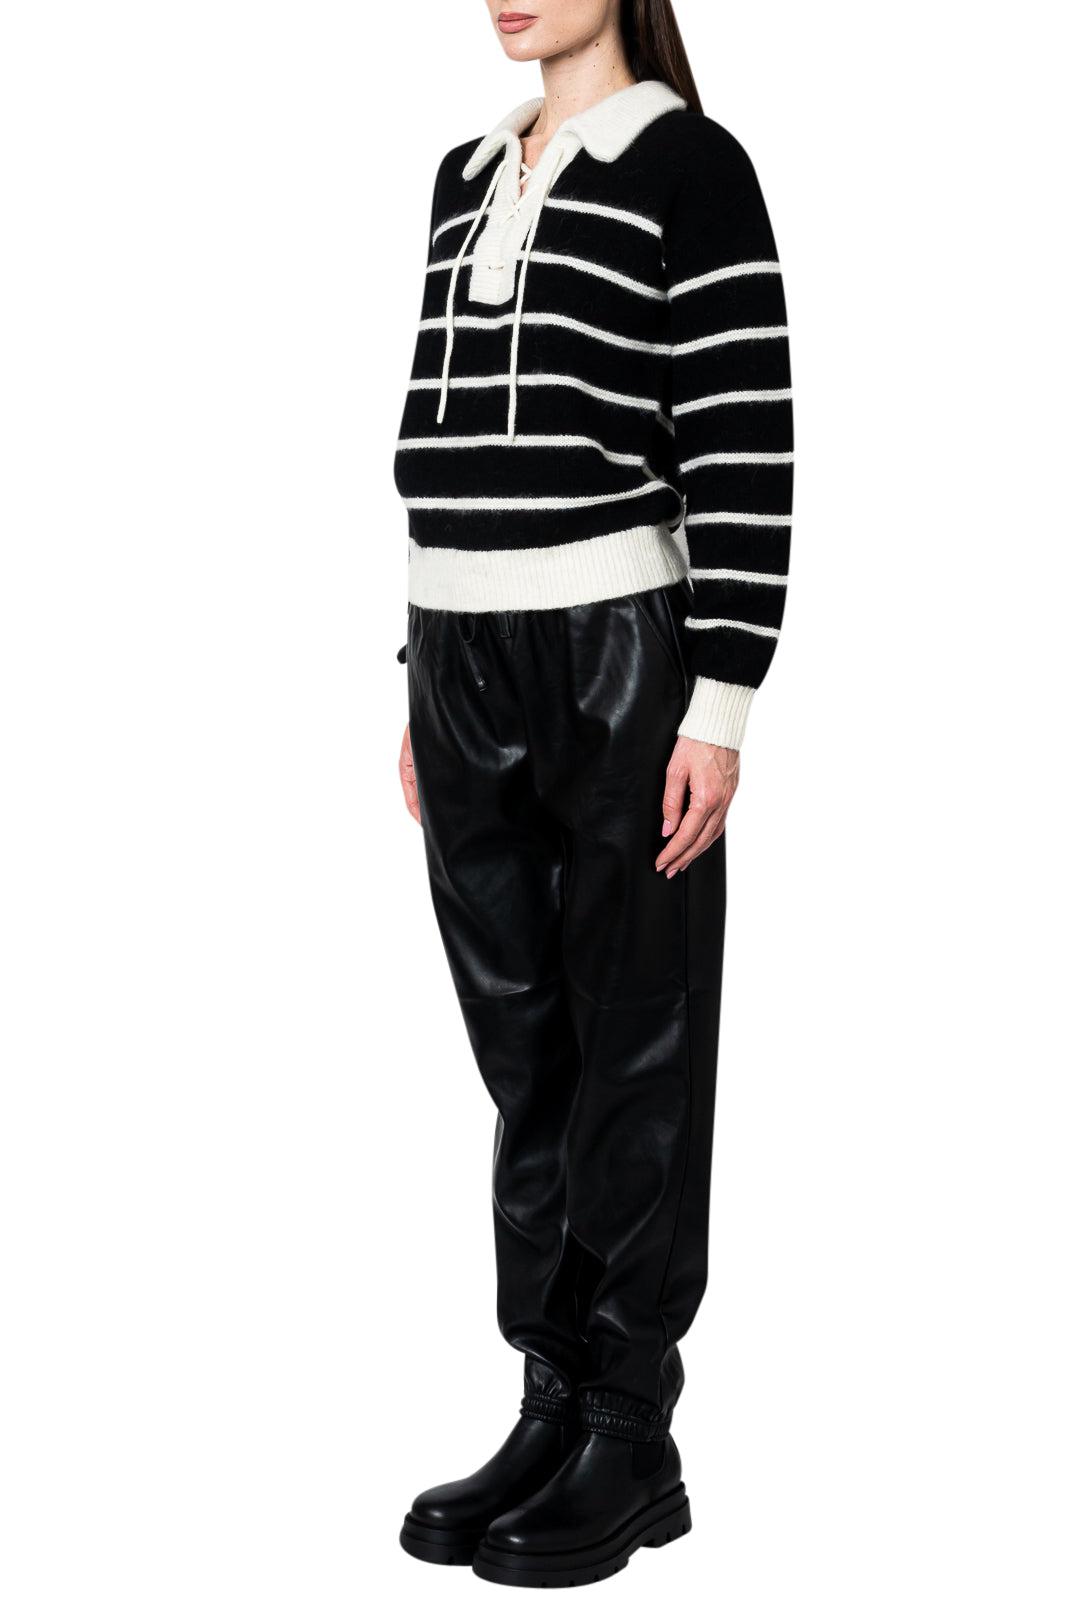 The Garment-Striped wool sweater-18505-dgallerystore